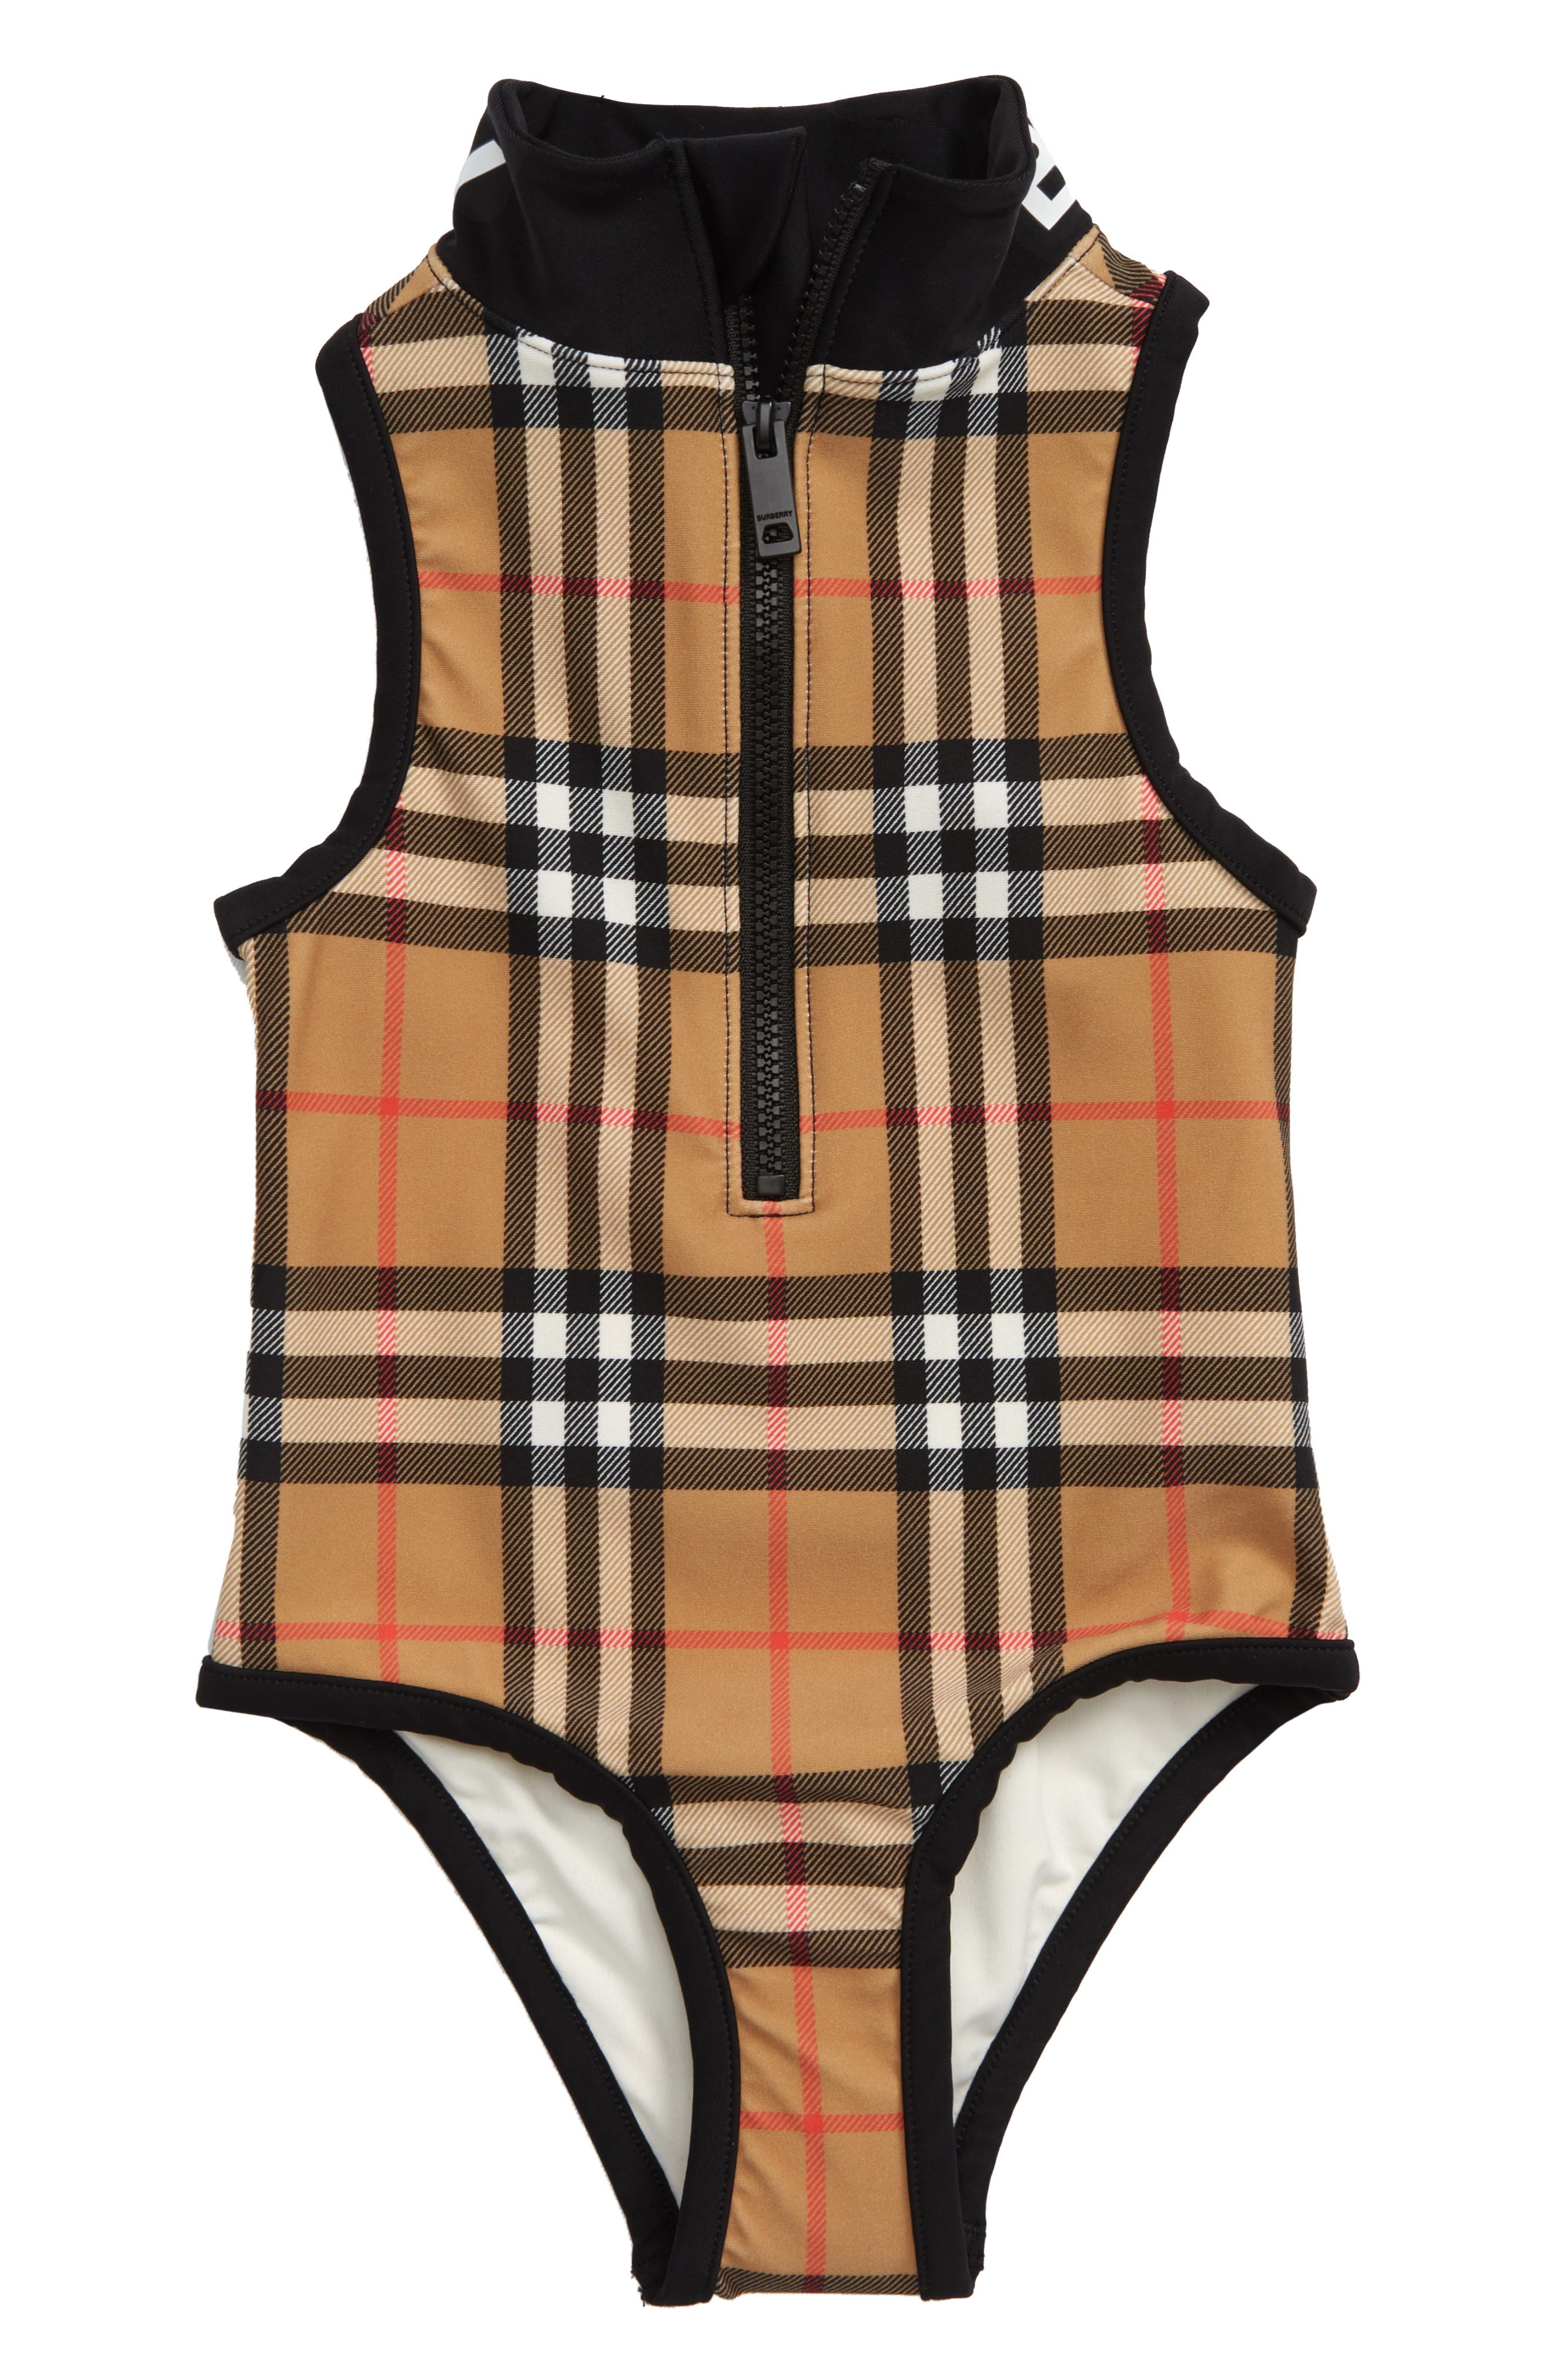 burberry bathing suit baby